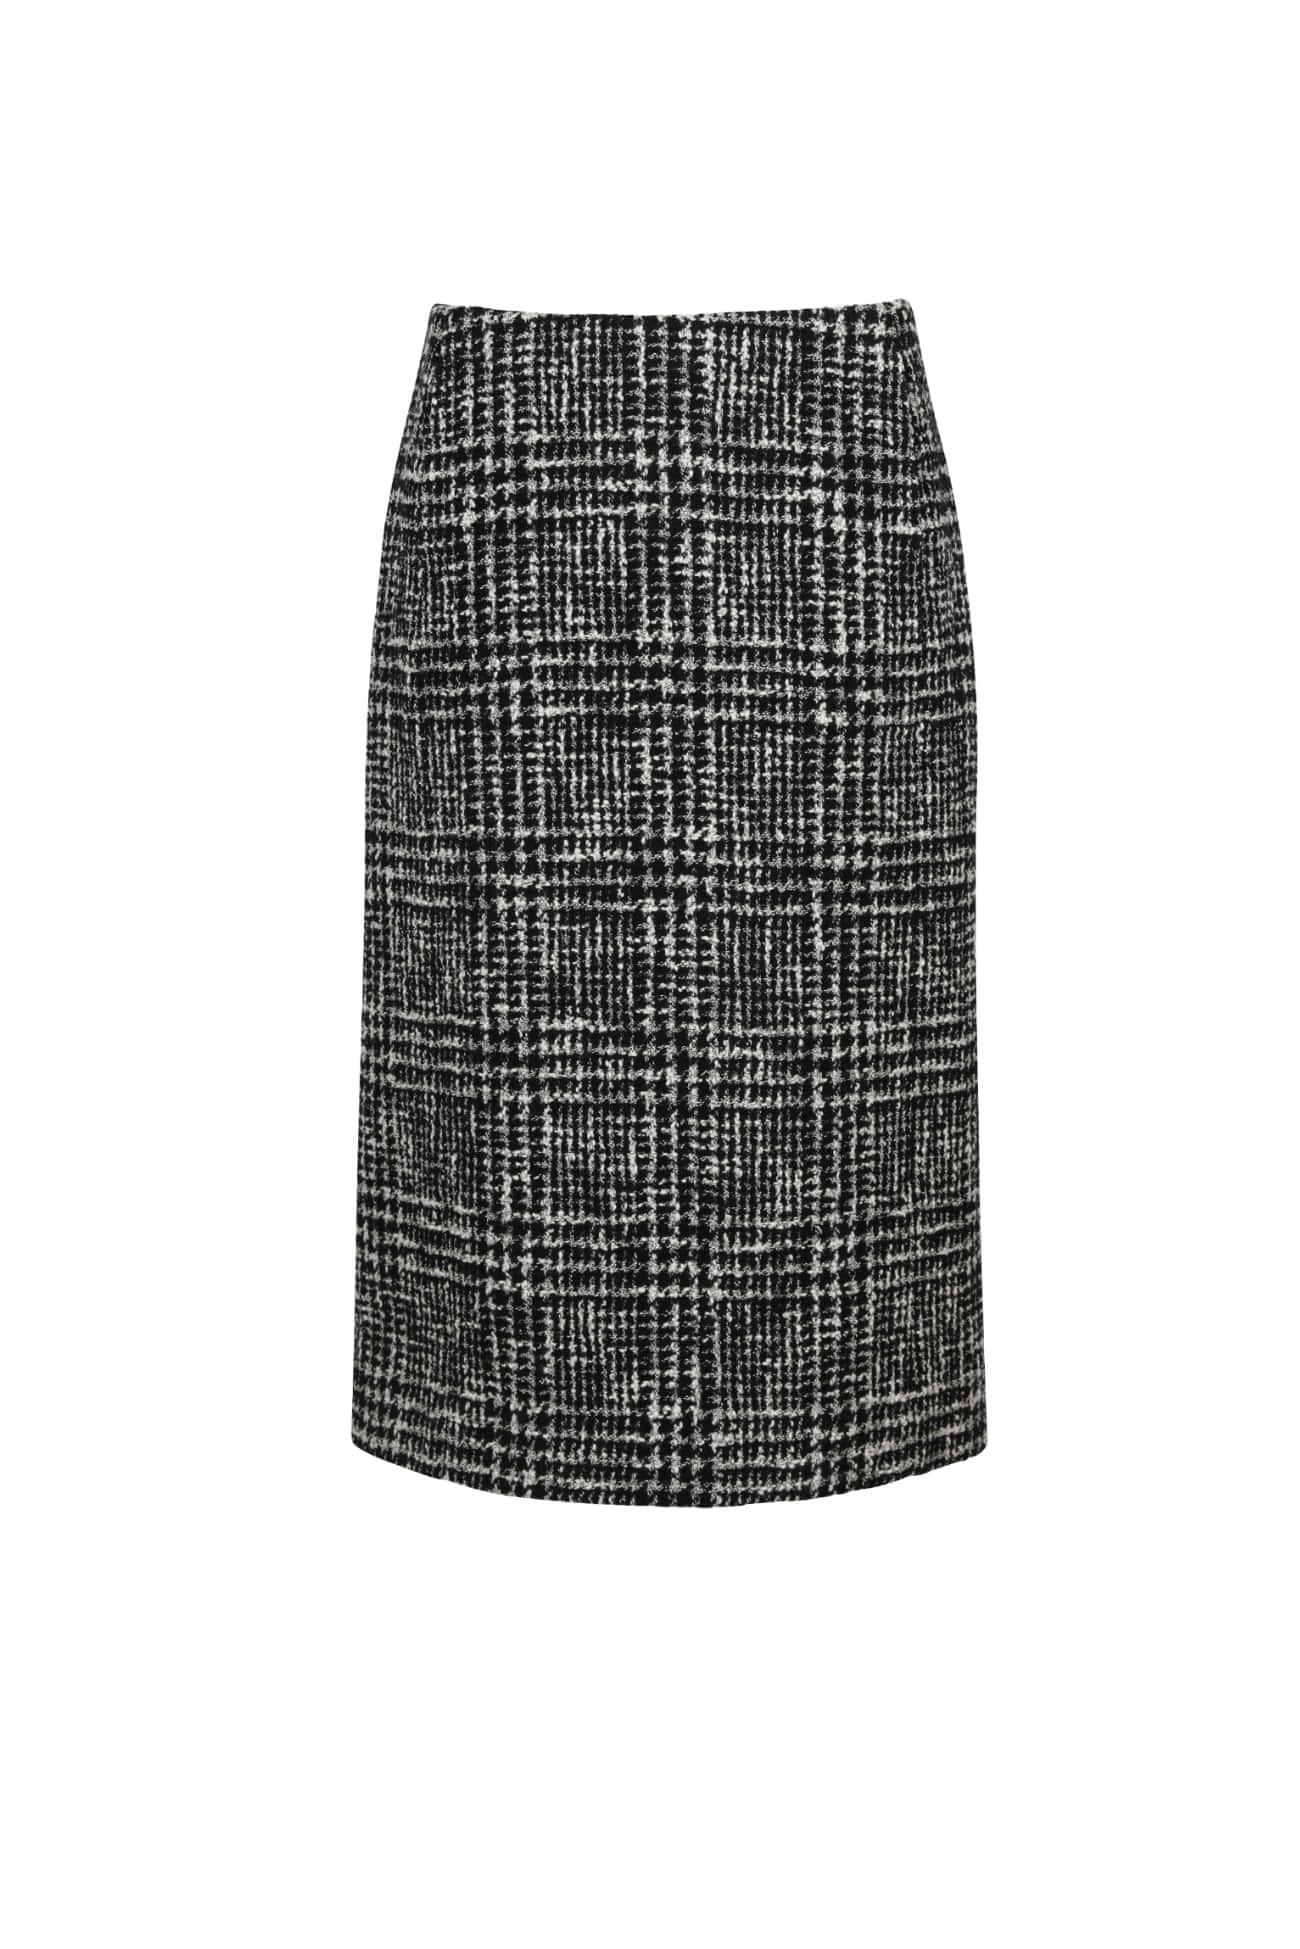 HIGH QUALITY LINE - CHECK Tweed Midi Skirt (Fabric by FINETEX, Made in JAPAN)